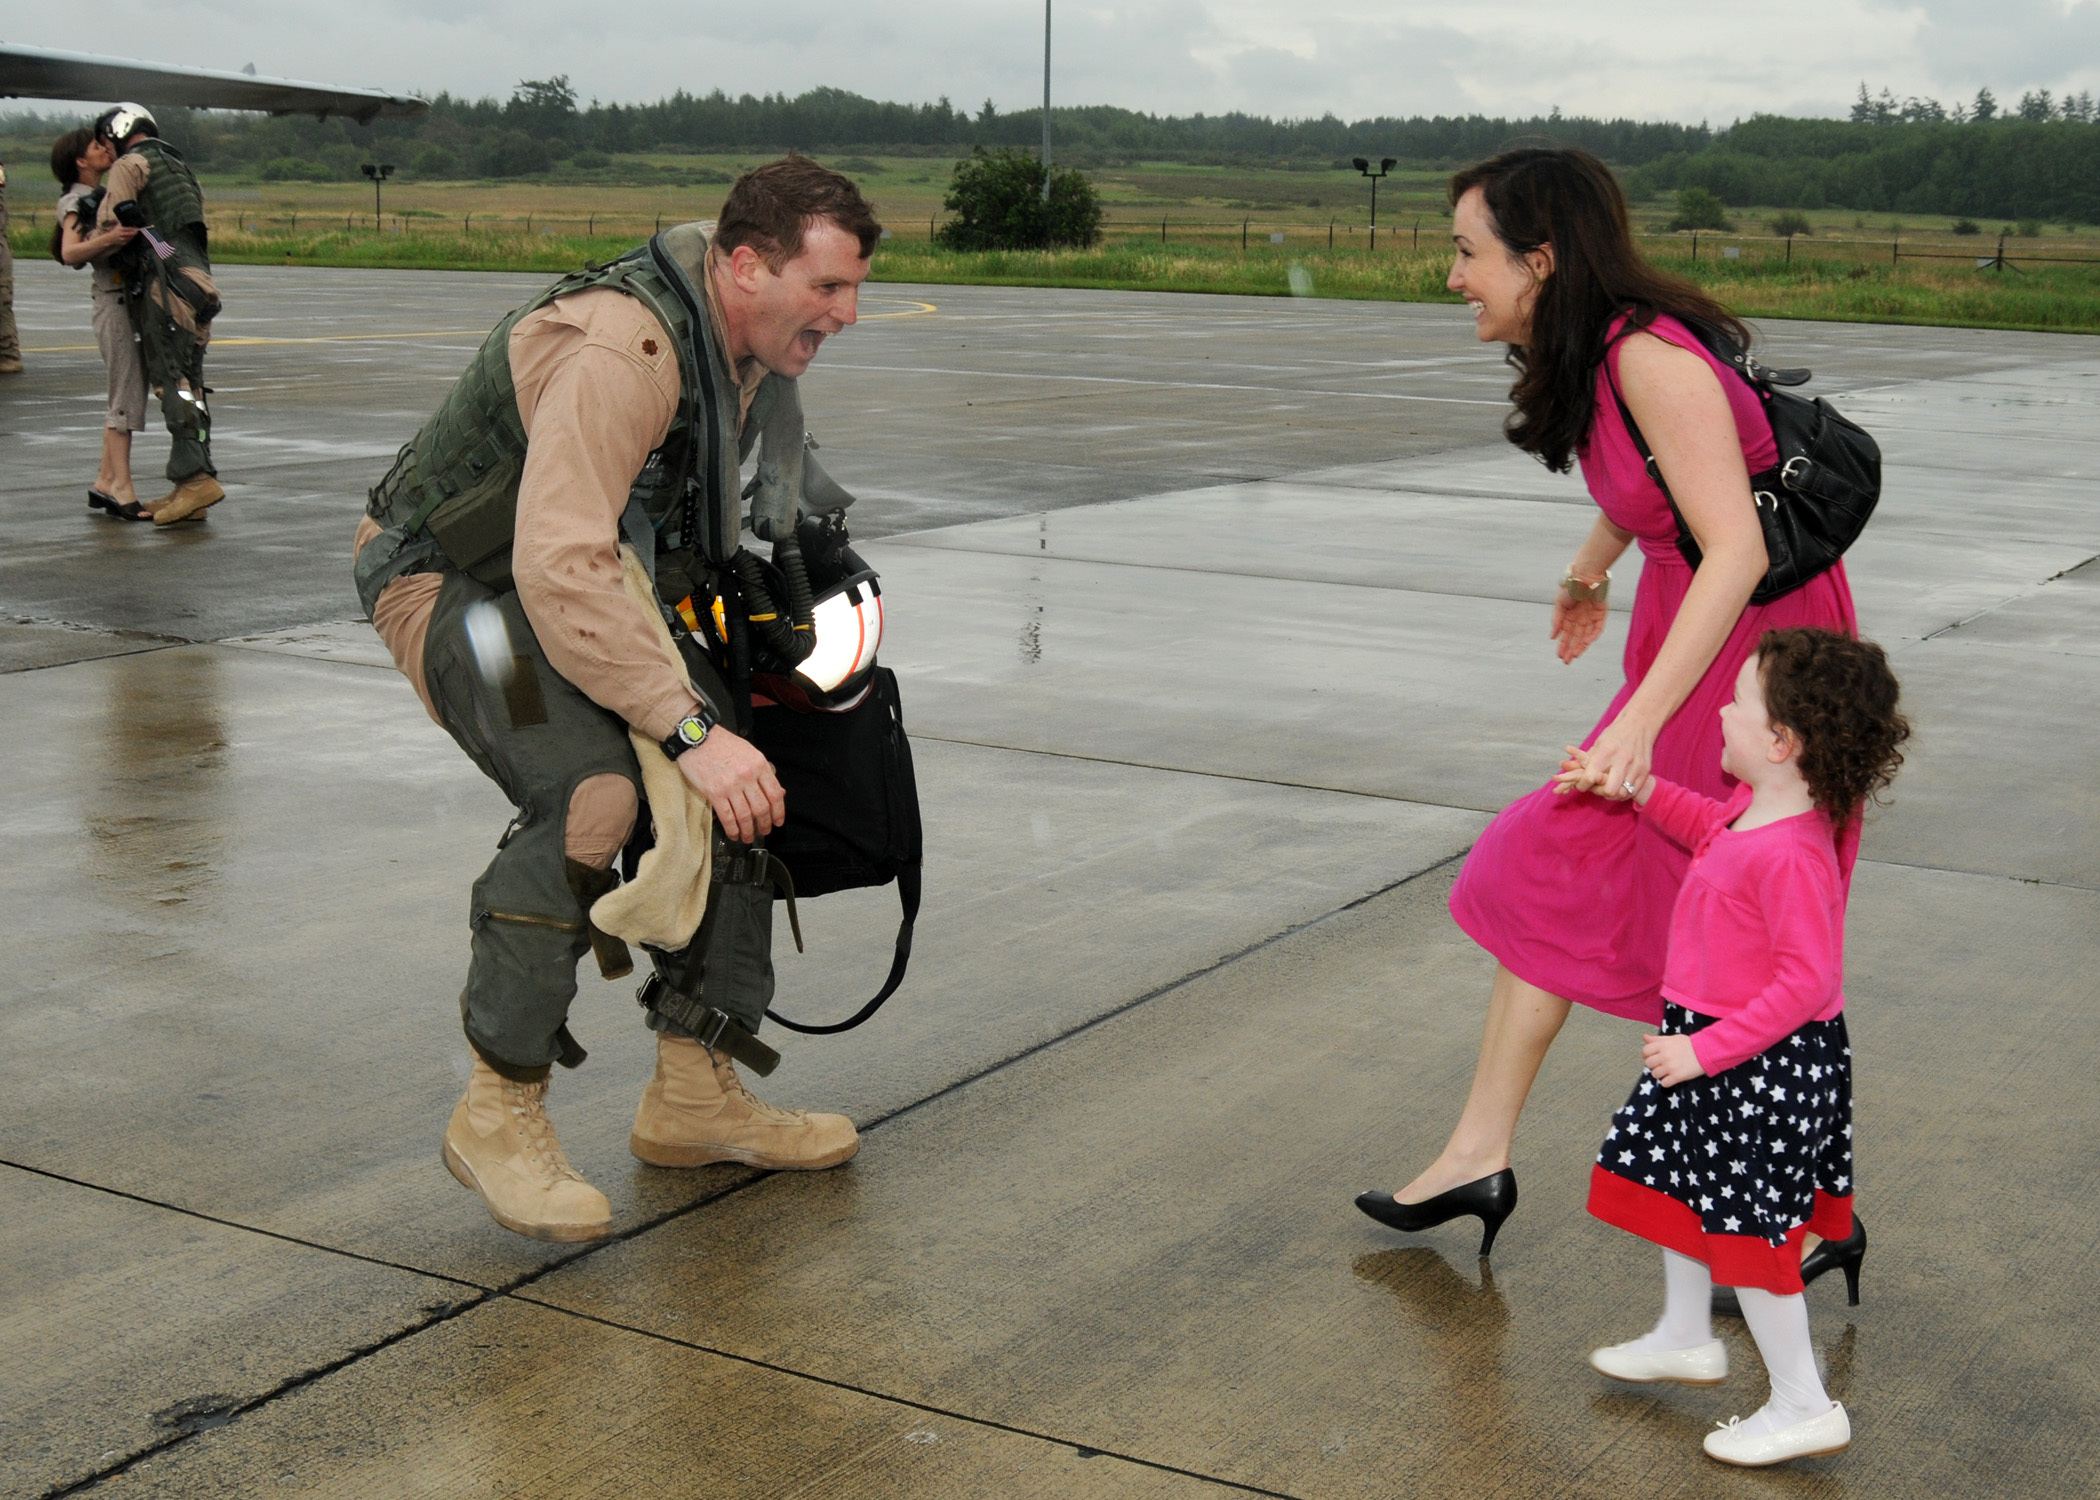 A man stoops in military uniform stoops down as a woman and a child runs toward him.